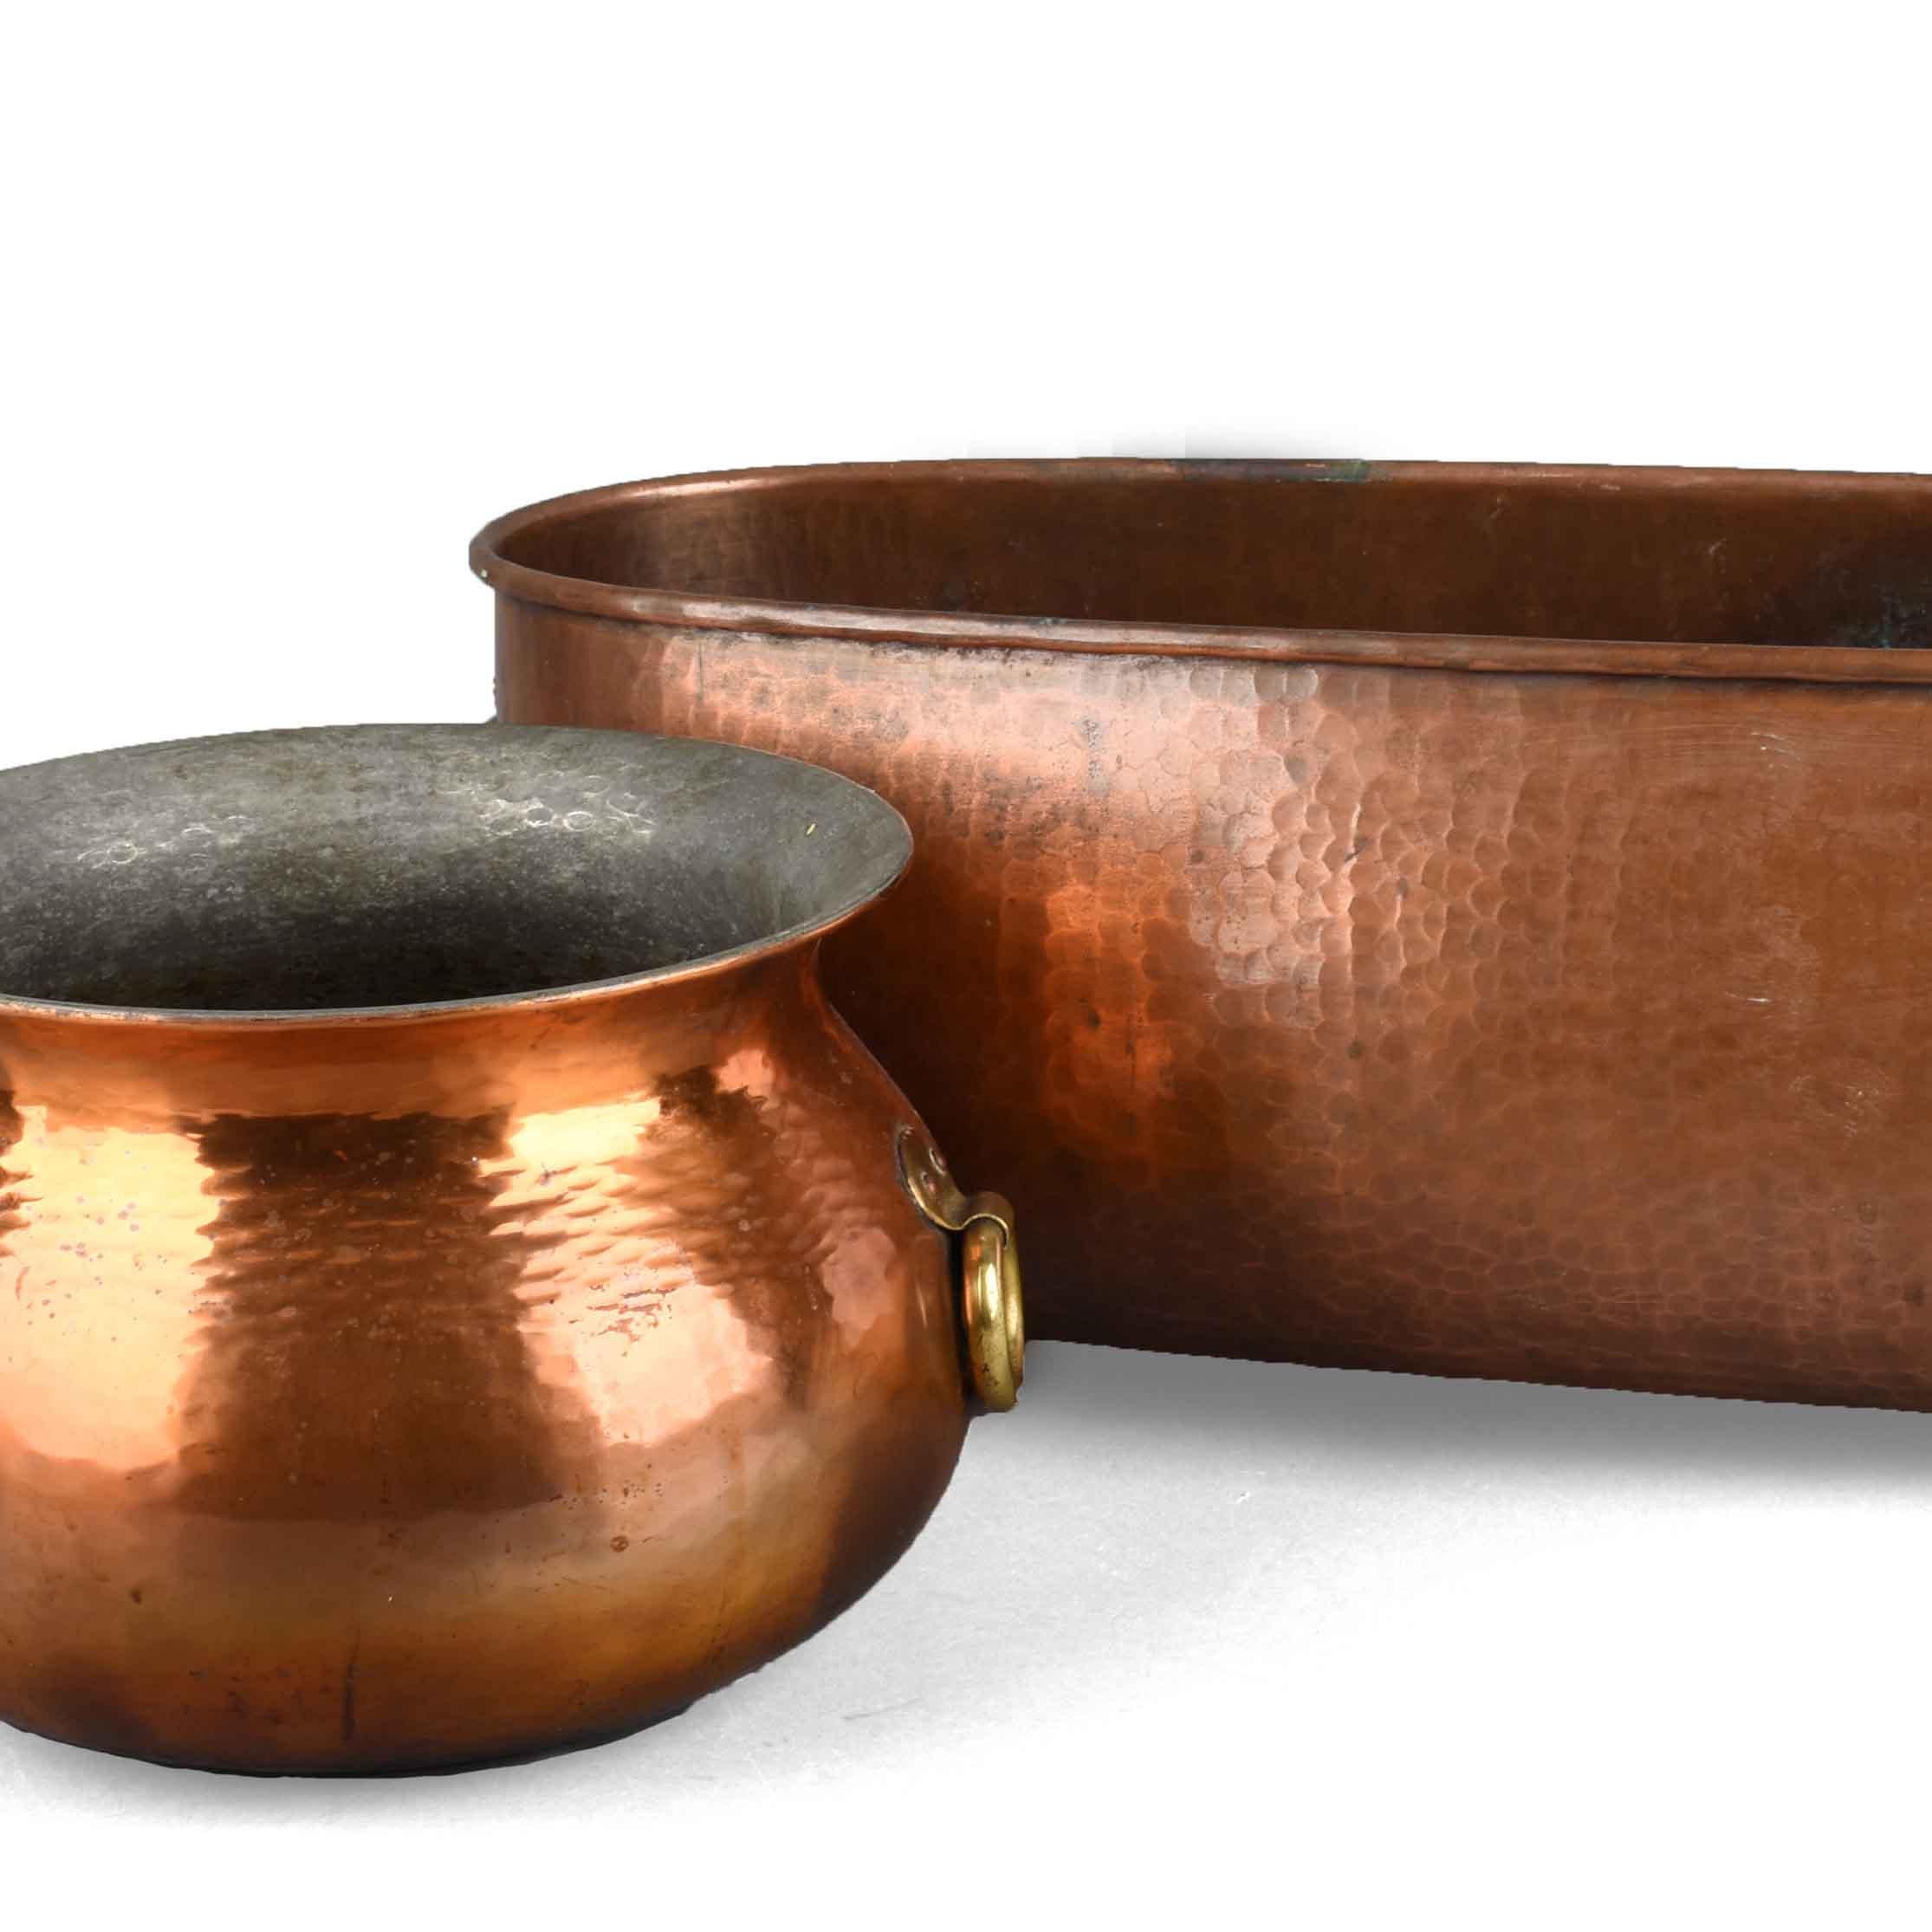 Jardinière and pot is an original decorative object realized between the 1940s and the 1950s.

Original copper pieces. 

The set includes a copper jardinière (19 x 54 cm) and a copper pot (17 x 23 cm).

Created by Eugen Zint. Made in Germany.